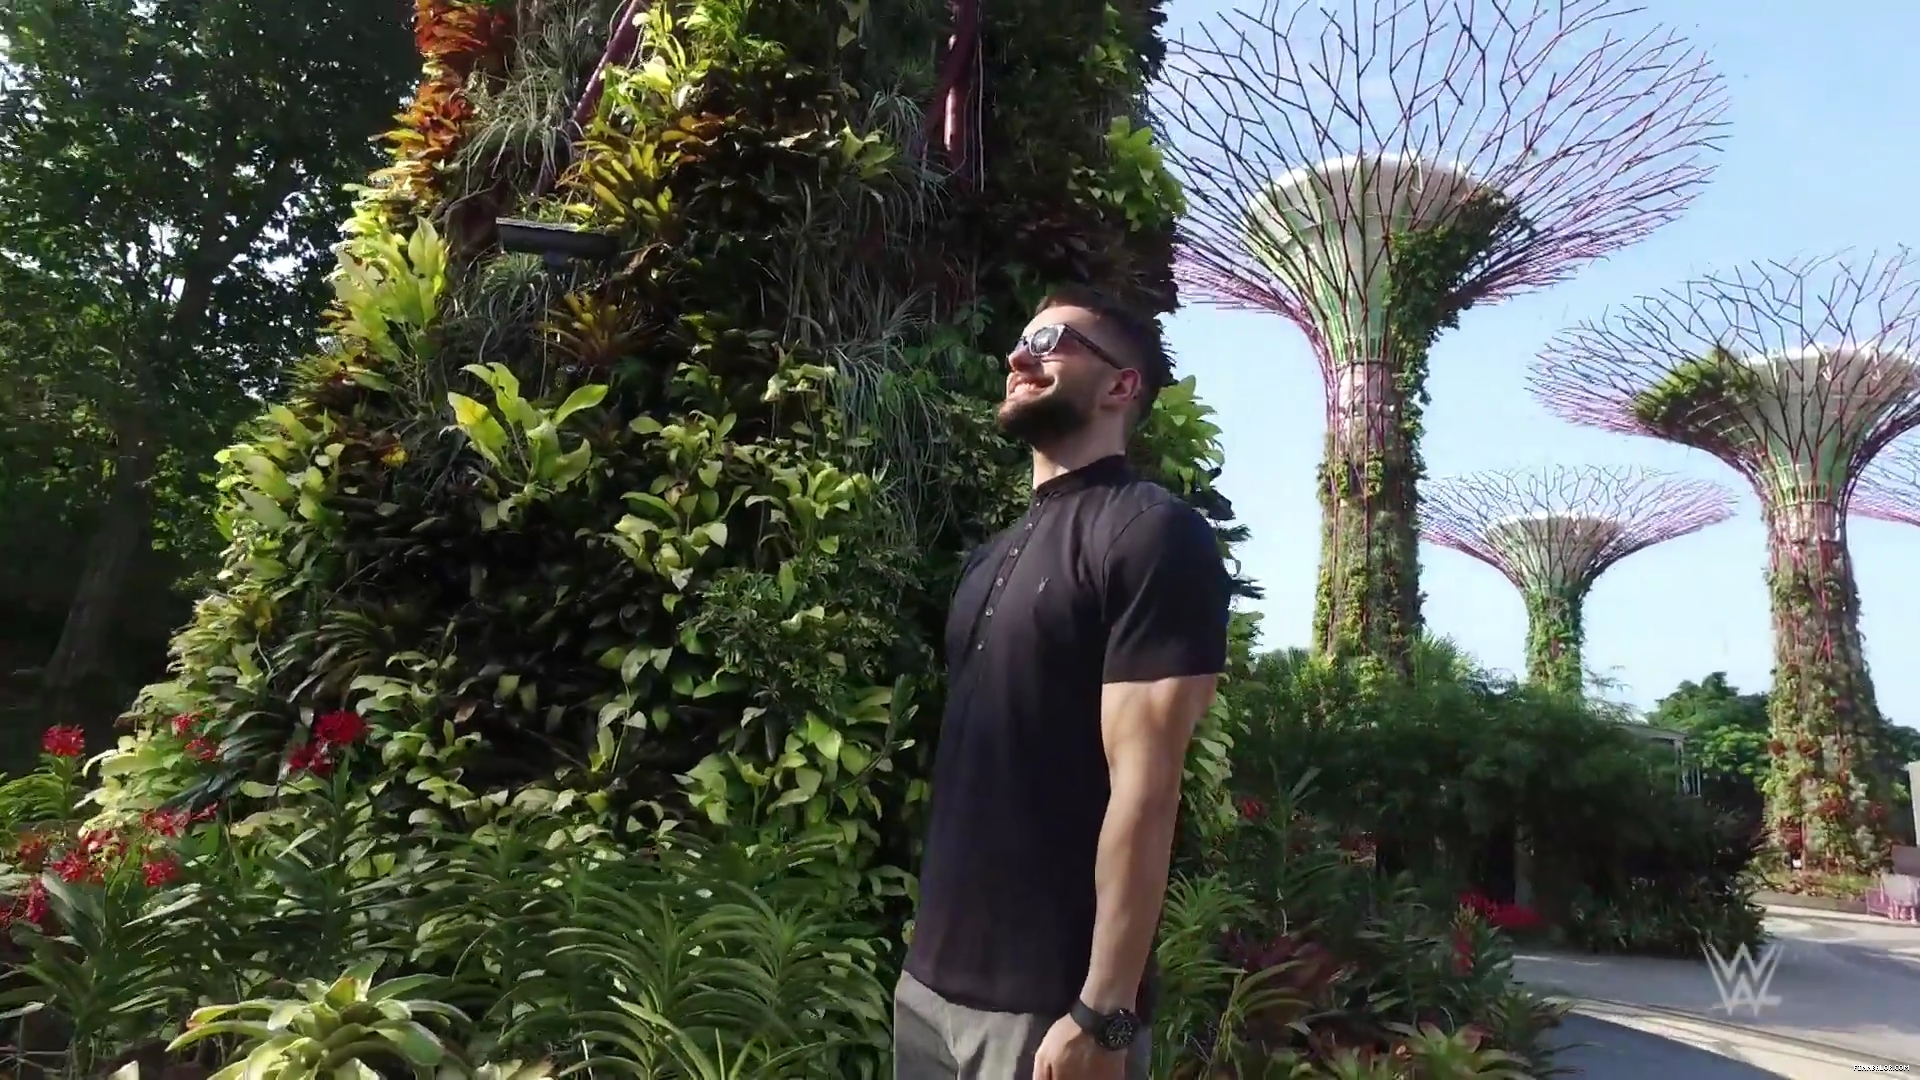 Finn_Balor_feels_like_he_is_in__Star_Wars__while_touring_Singapore_s_Supertree__mp40002.jpg